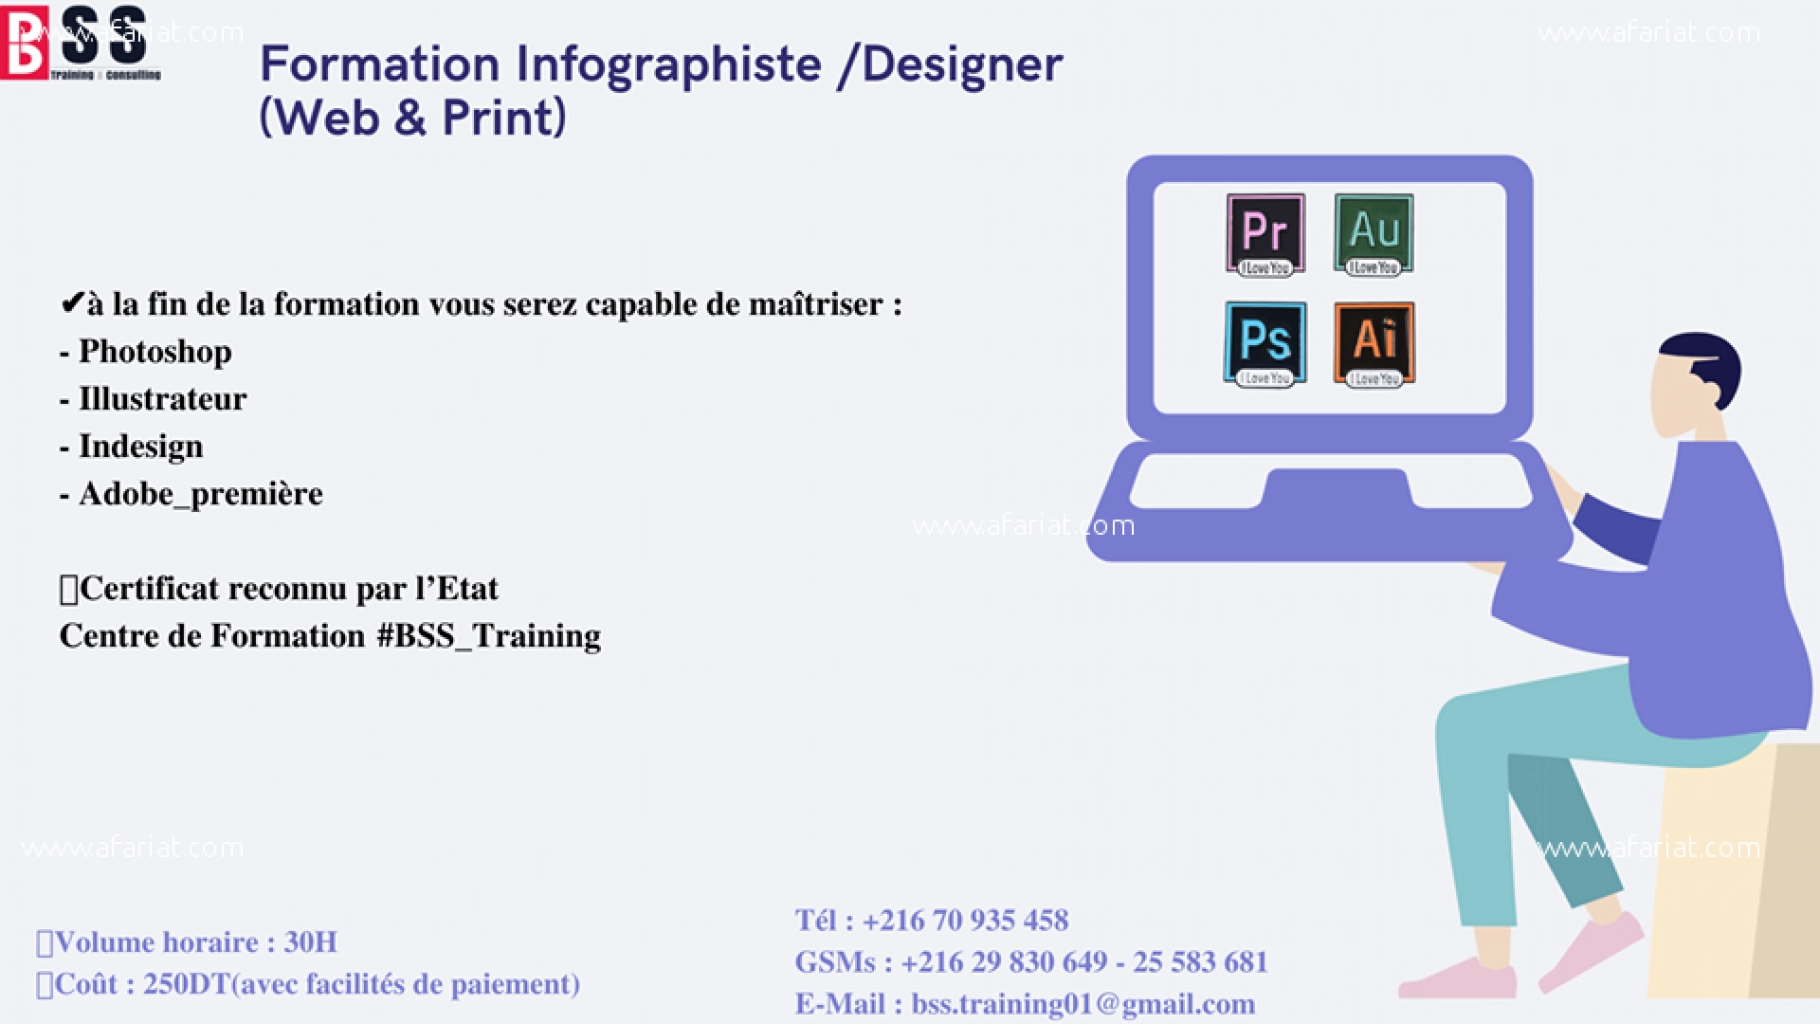 Formation infographie